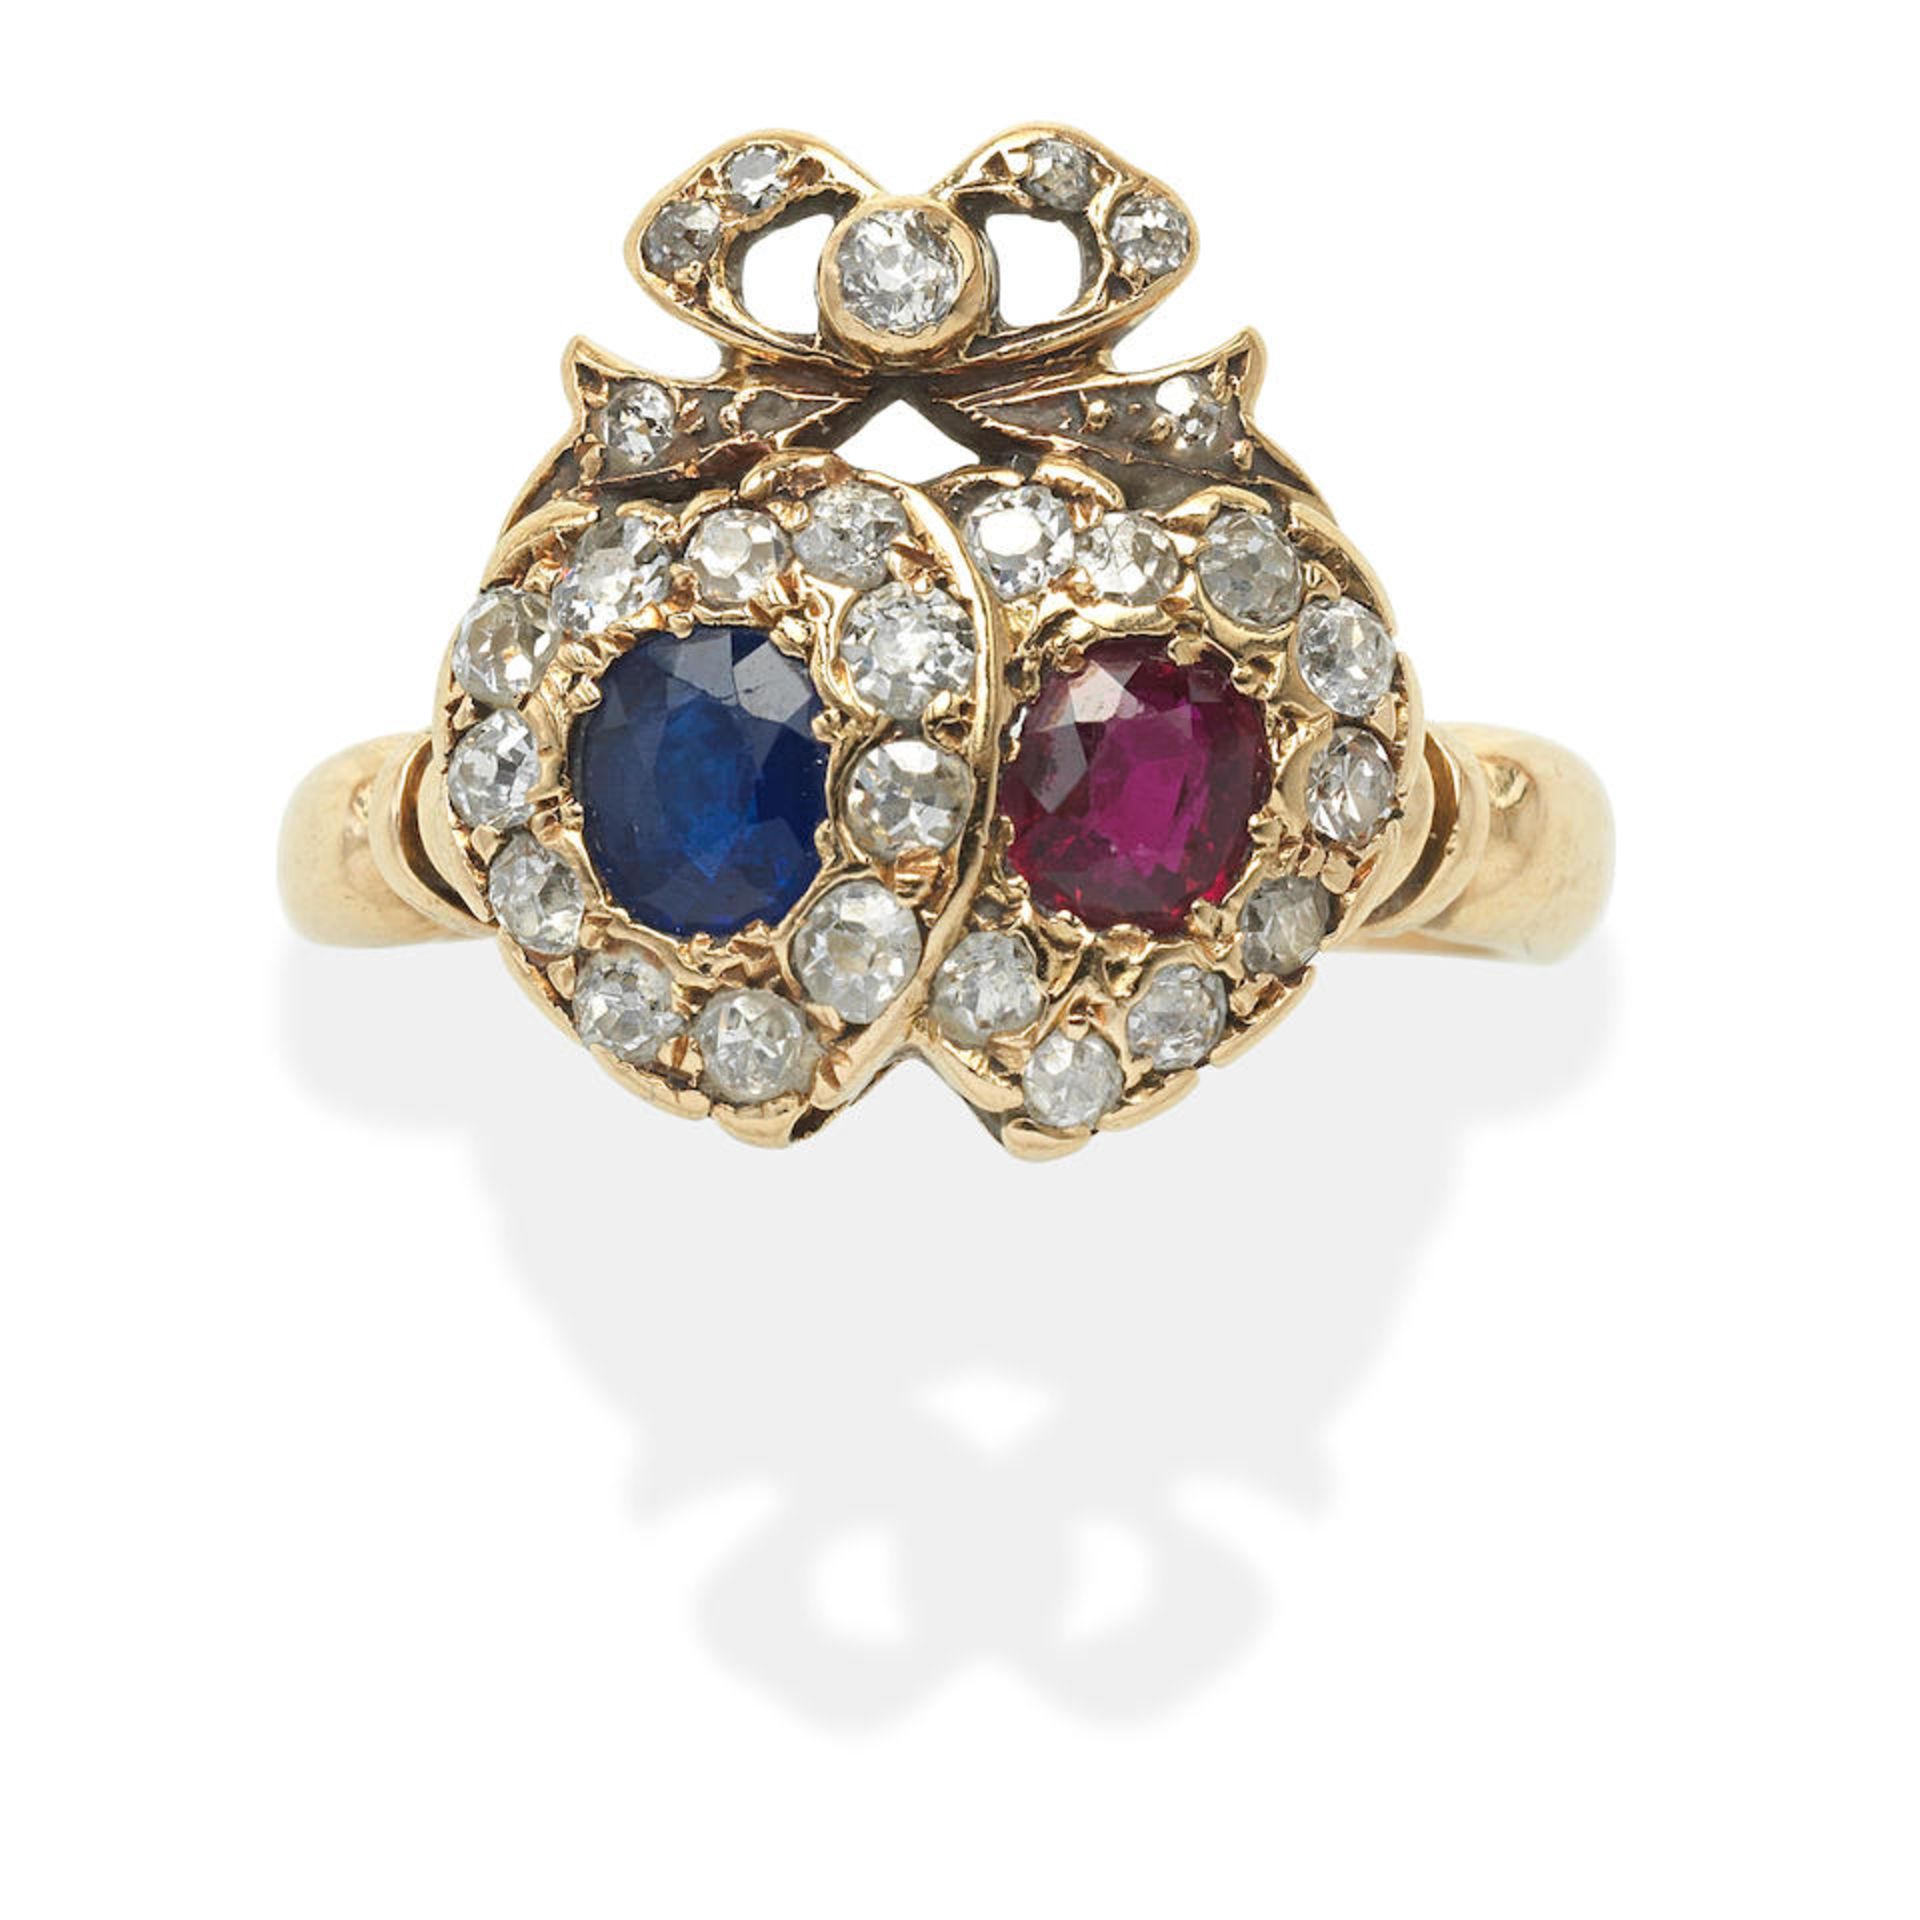 RUBY, SAPPHIRE AND DIAMOND TWIN HEART RING,